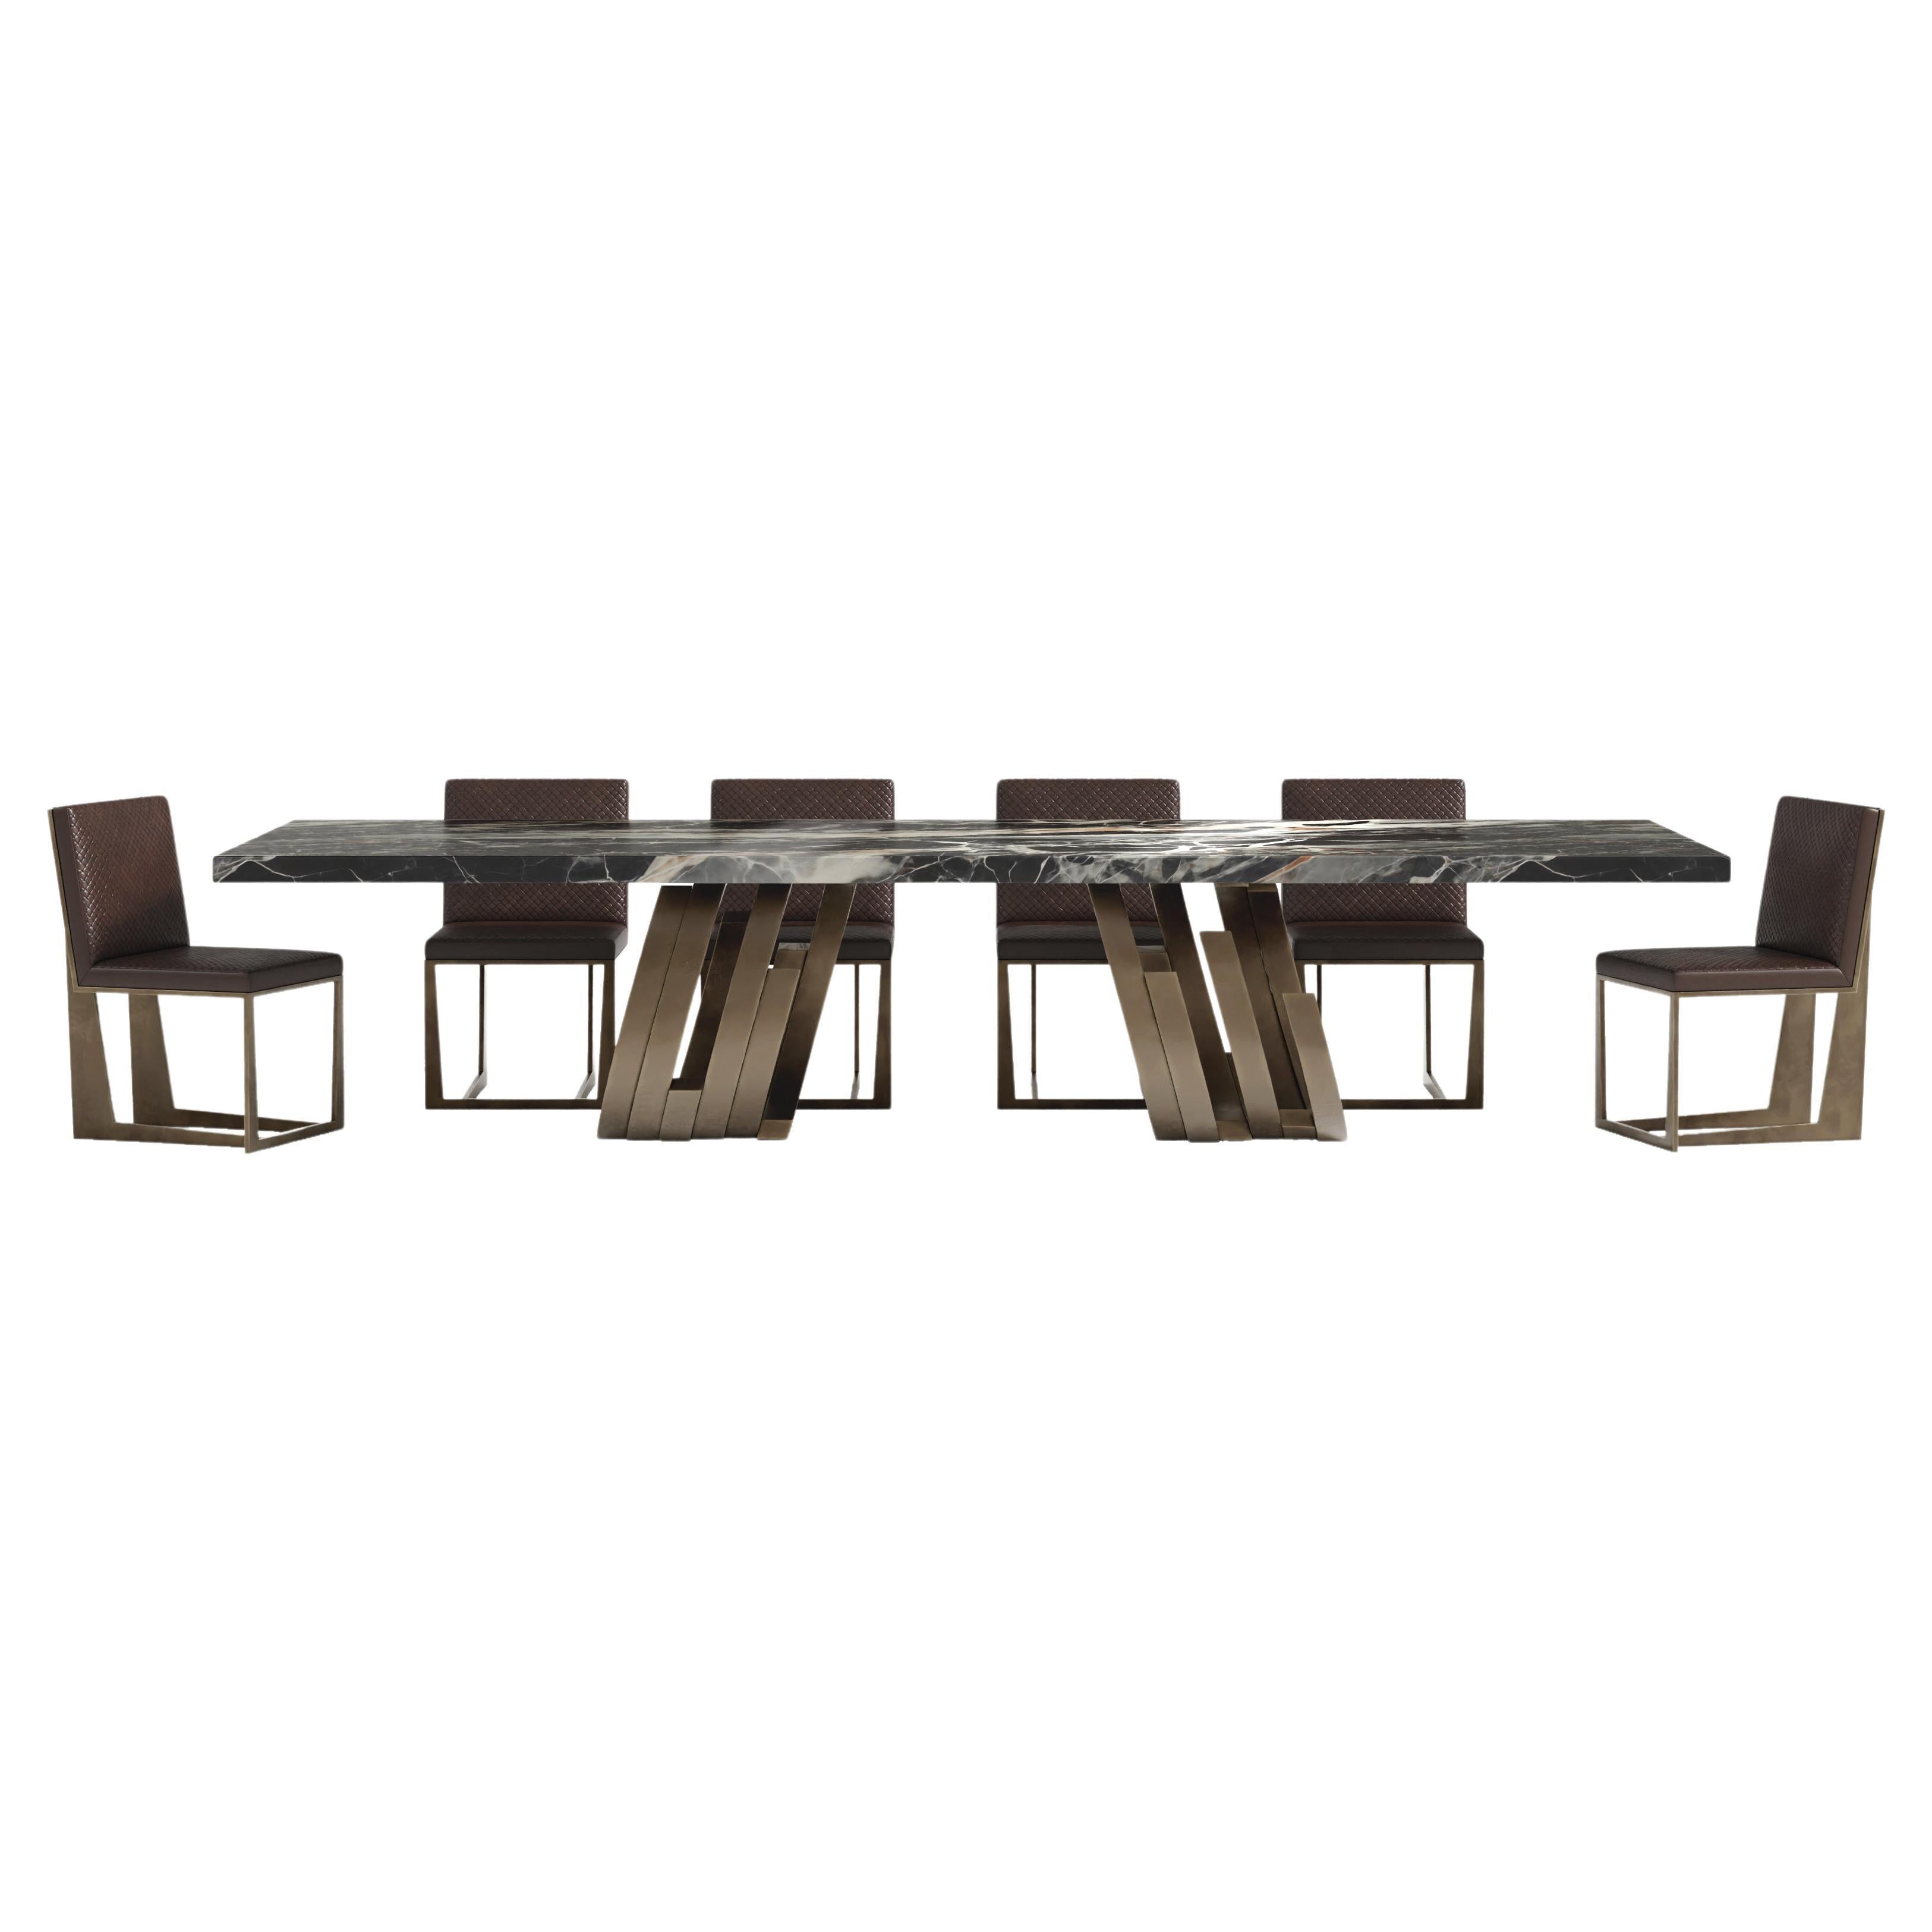 Oculus Dining Table & 10 Affilato Chairs Dining Room Set